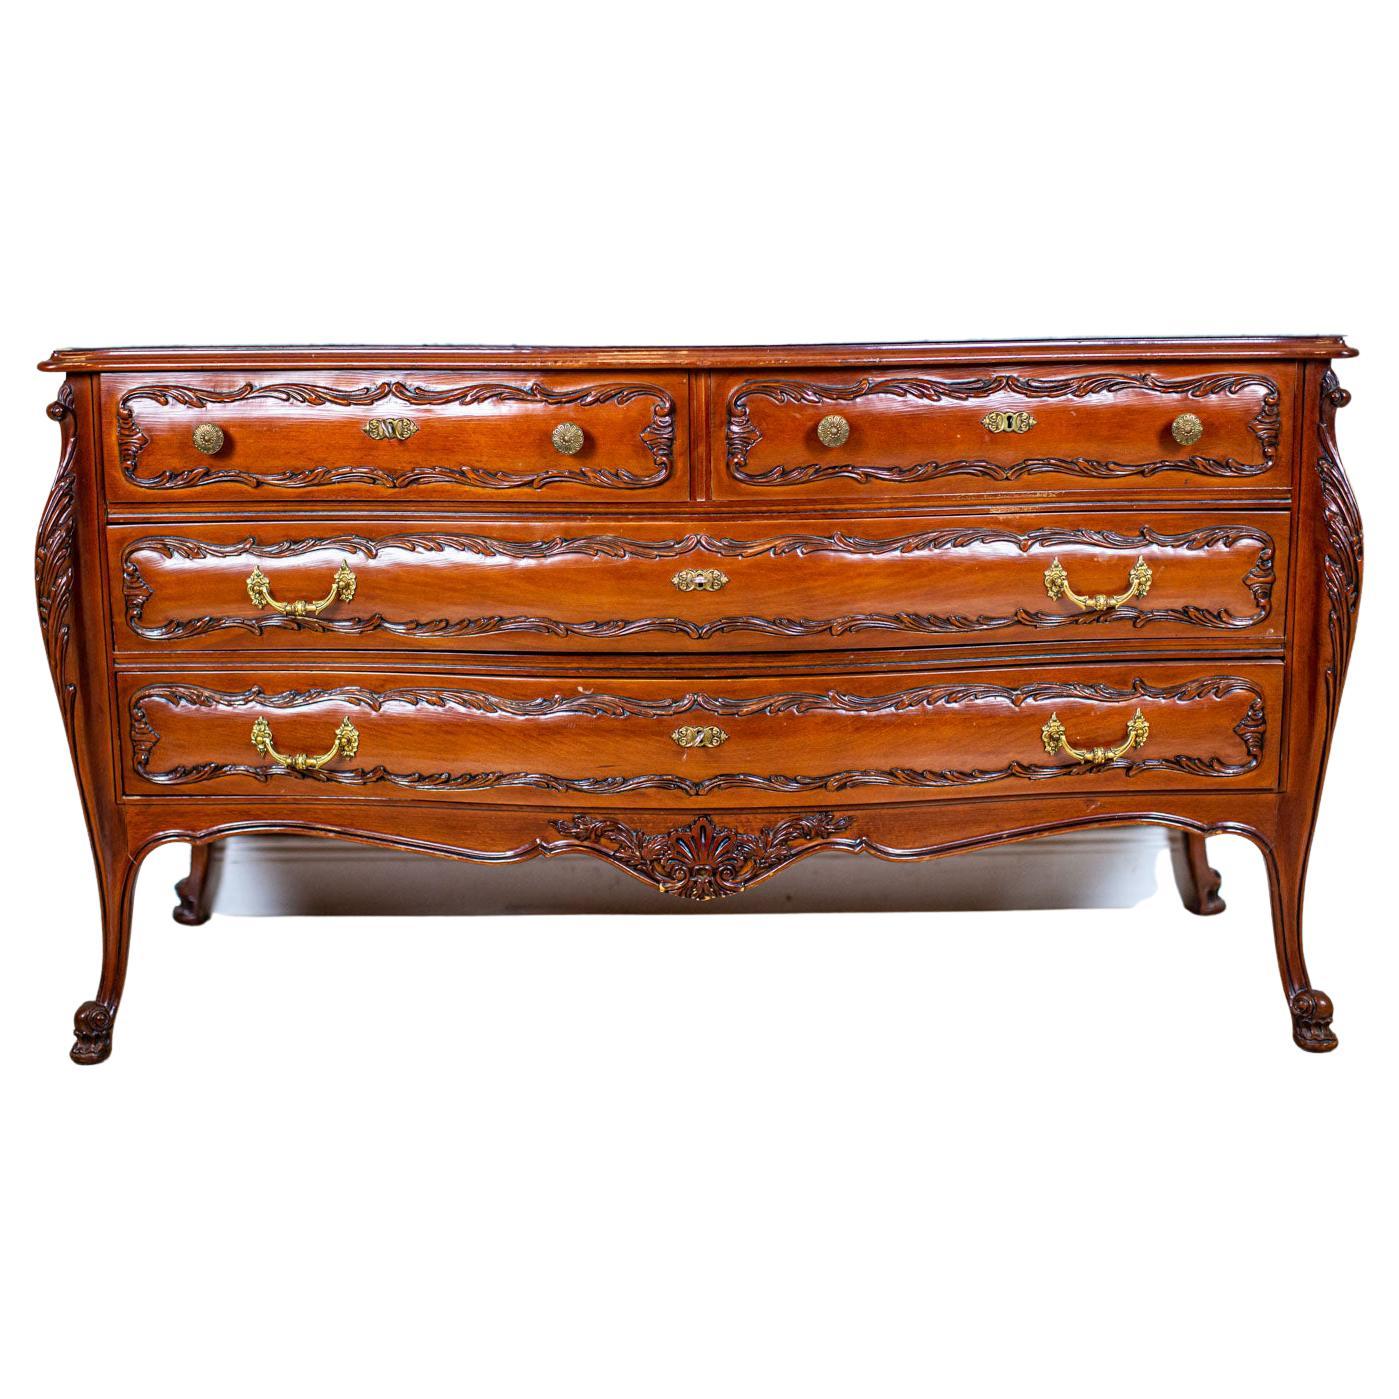 Decorative Beech Dresser From the Mid. 20th Century with Marble Top